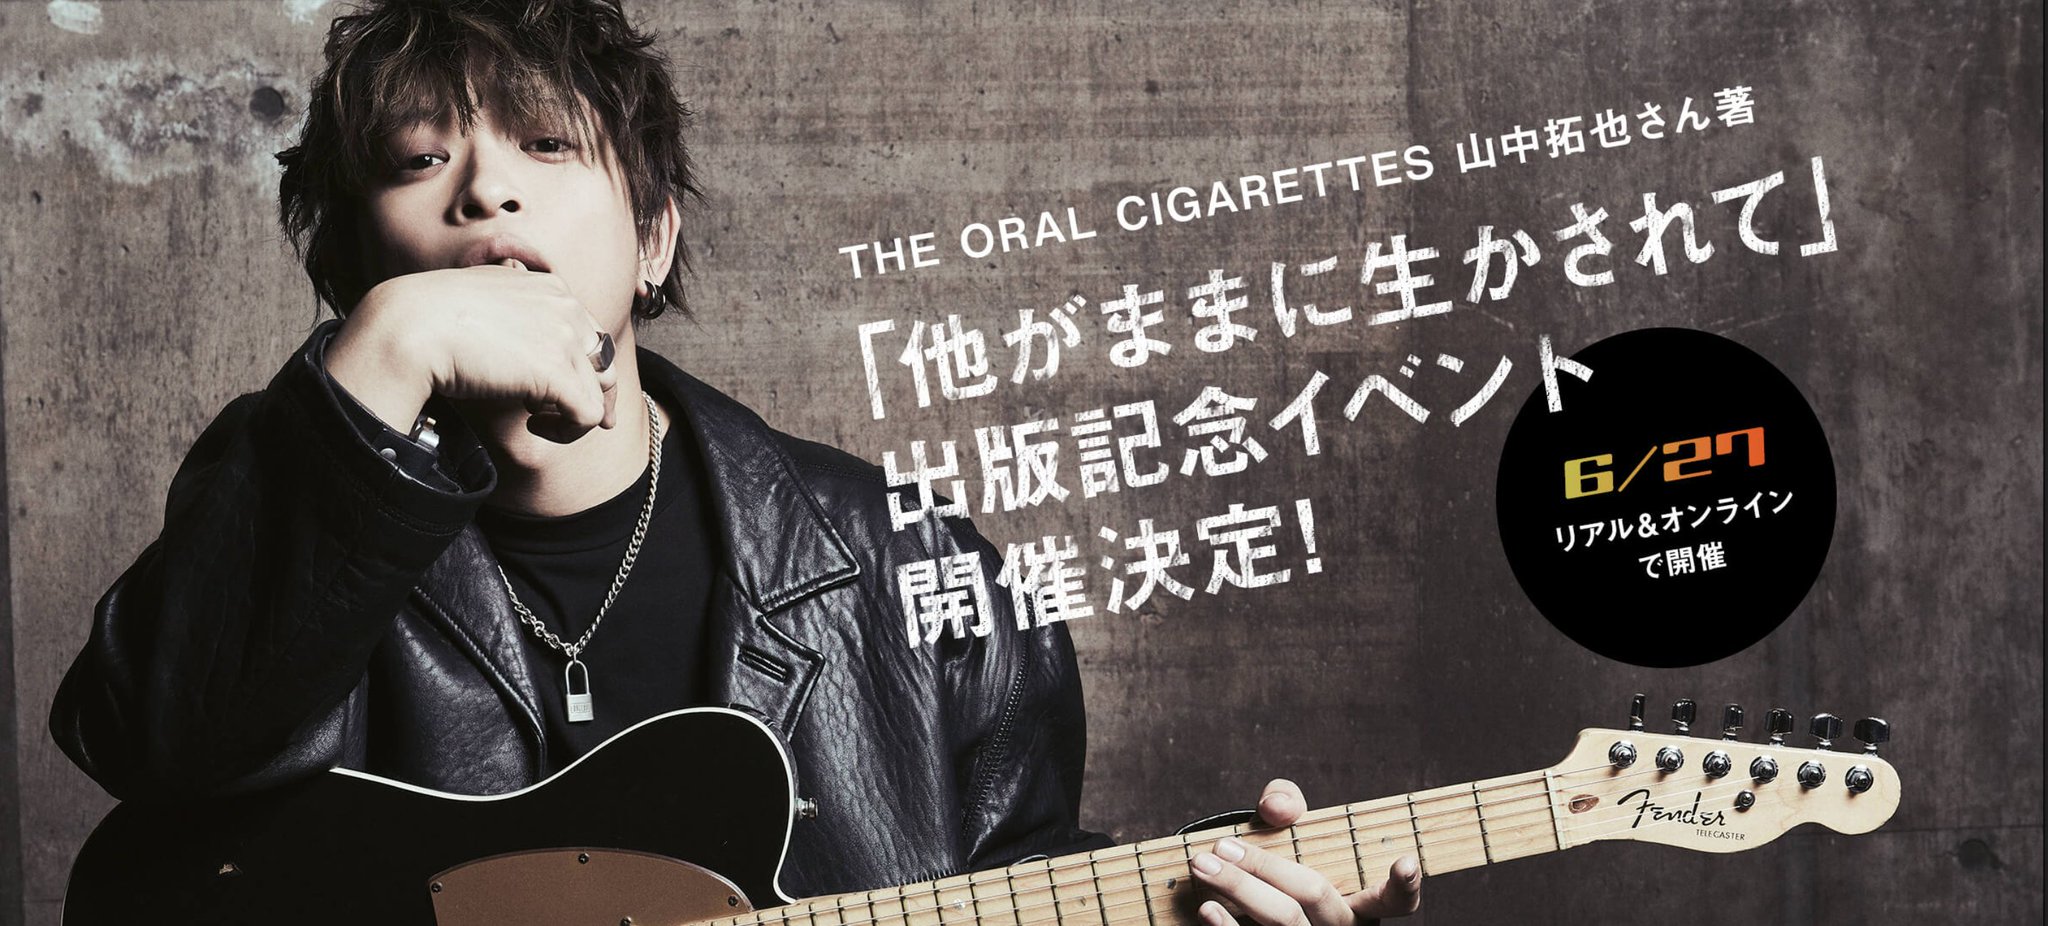 the oral cigarettes ベースボールシャツ